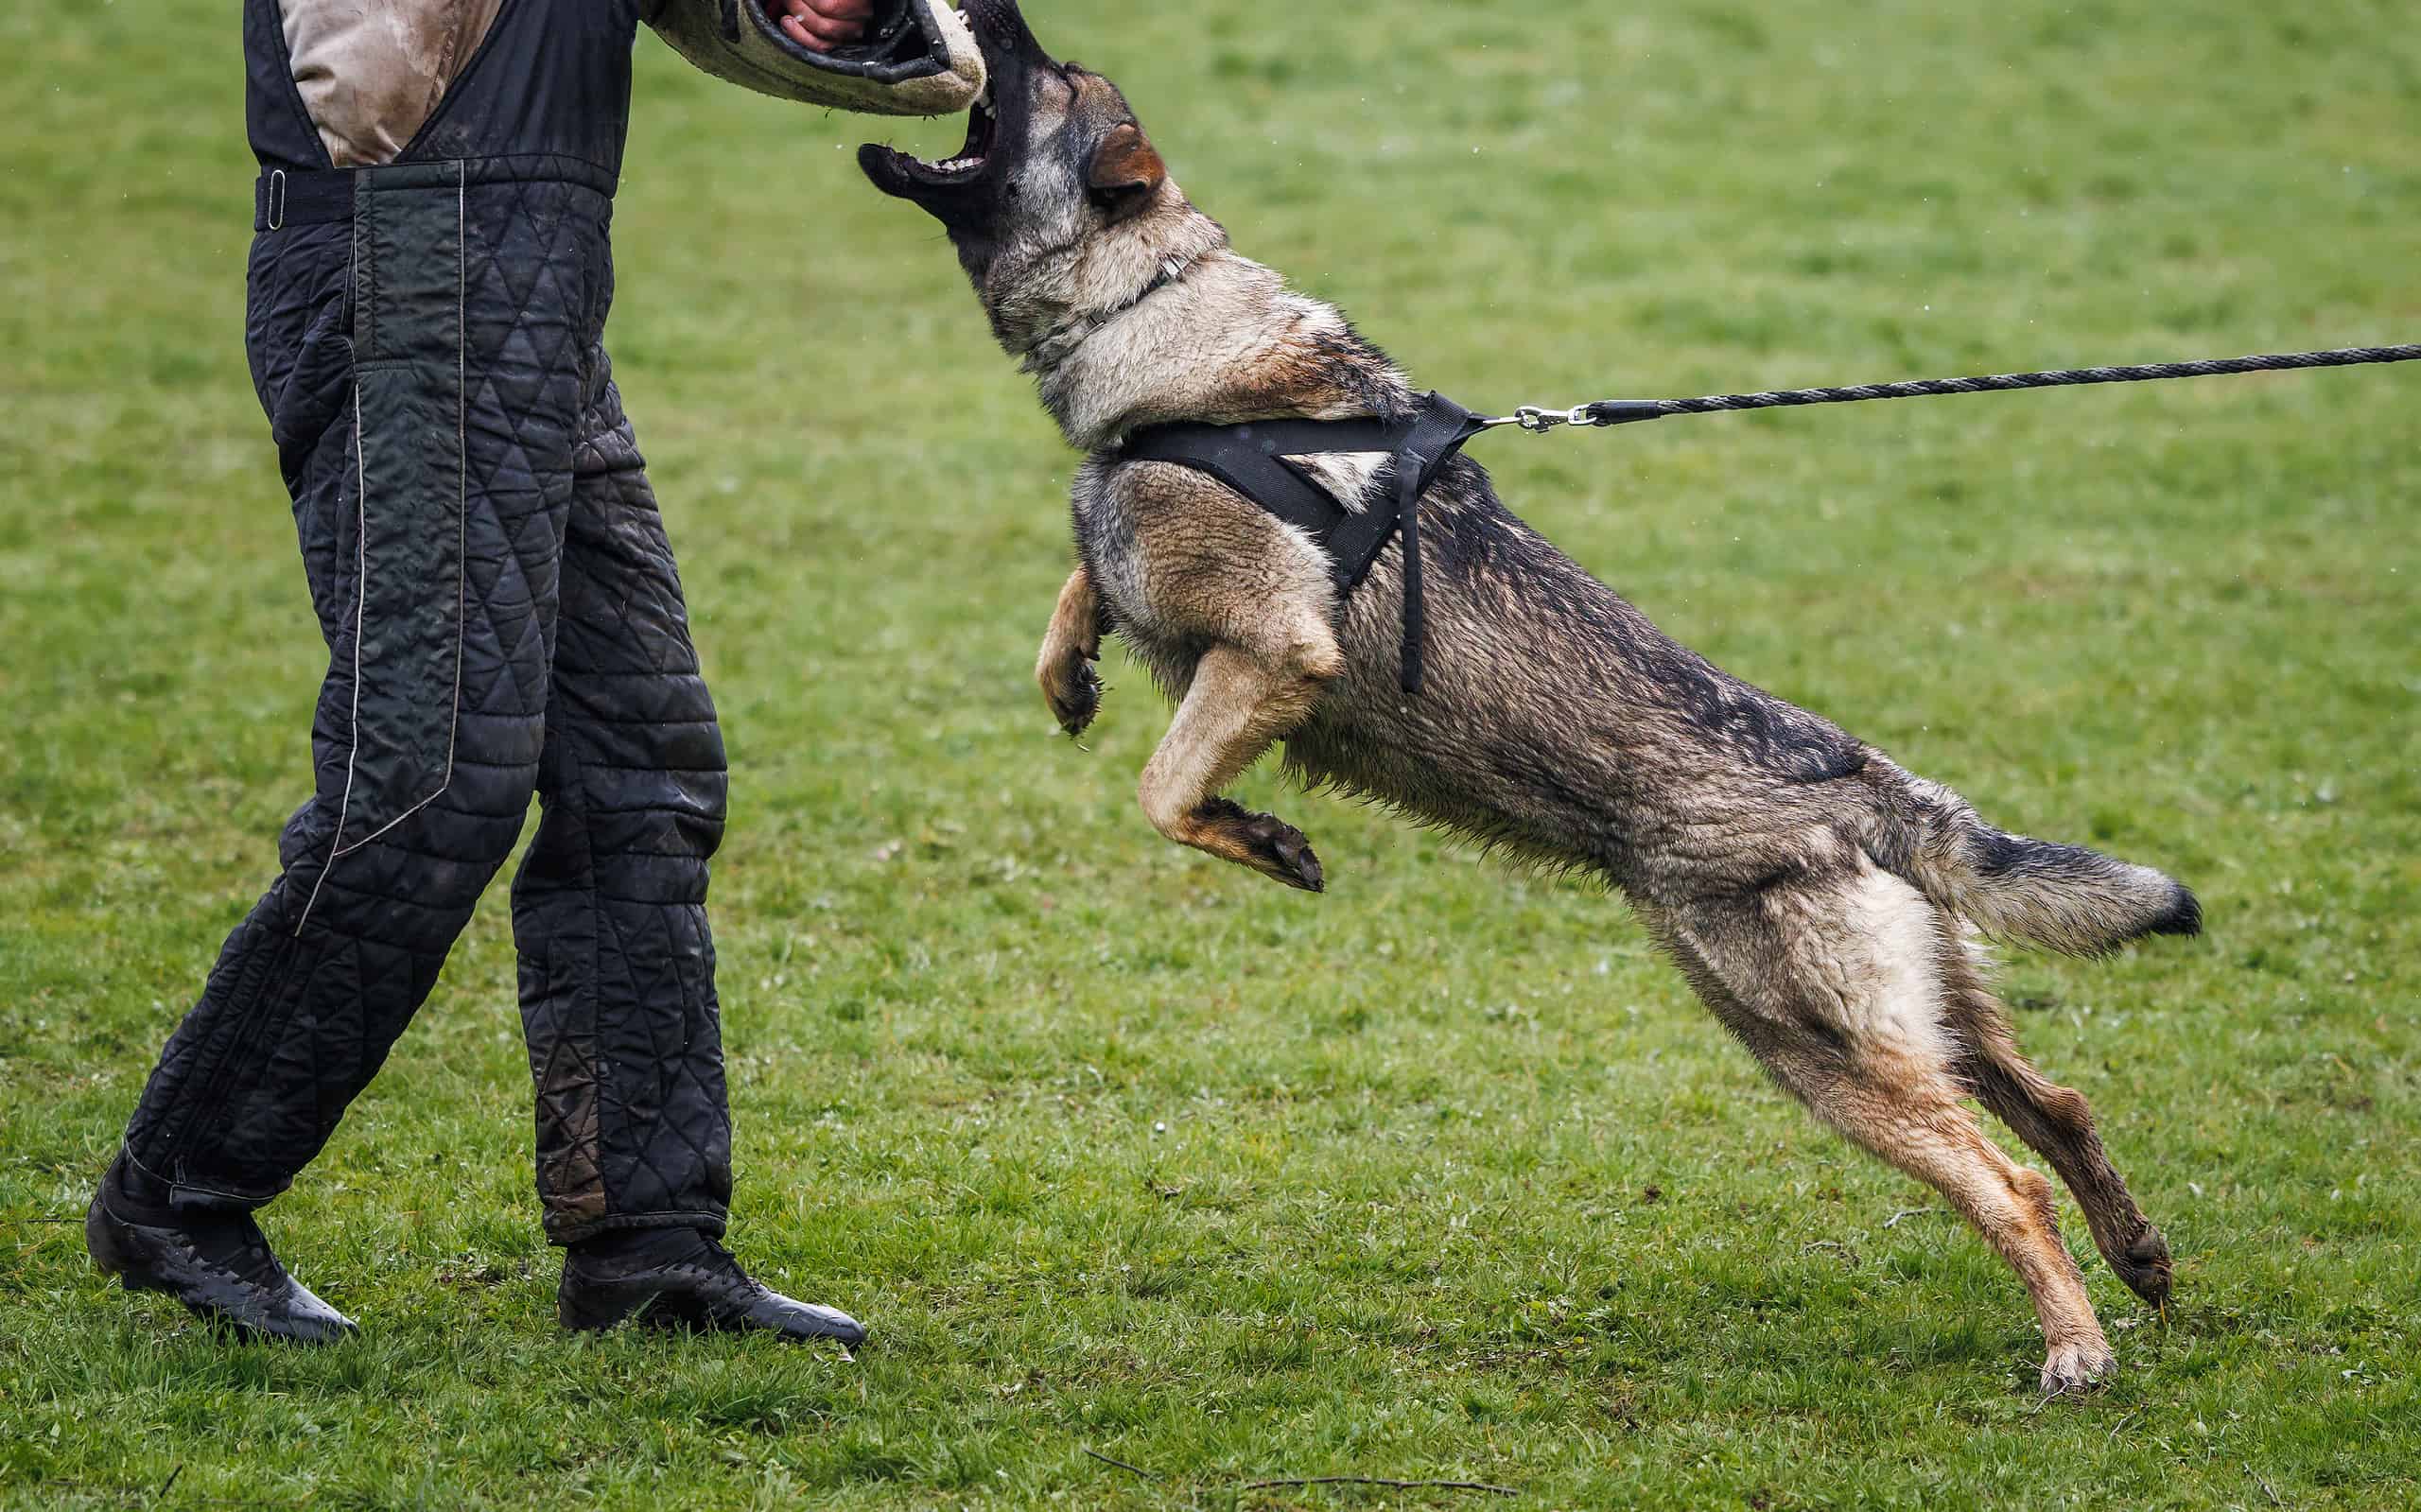 Trained dog doing defence and biting work with dog handler